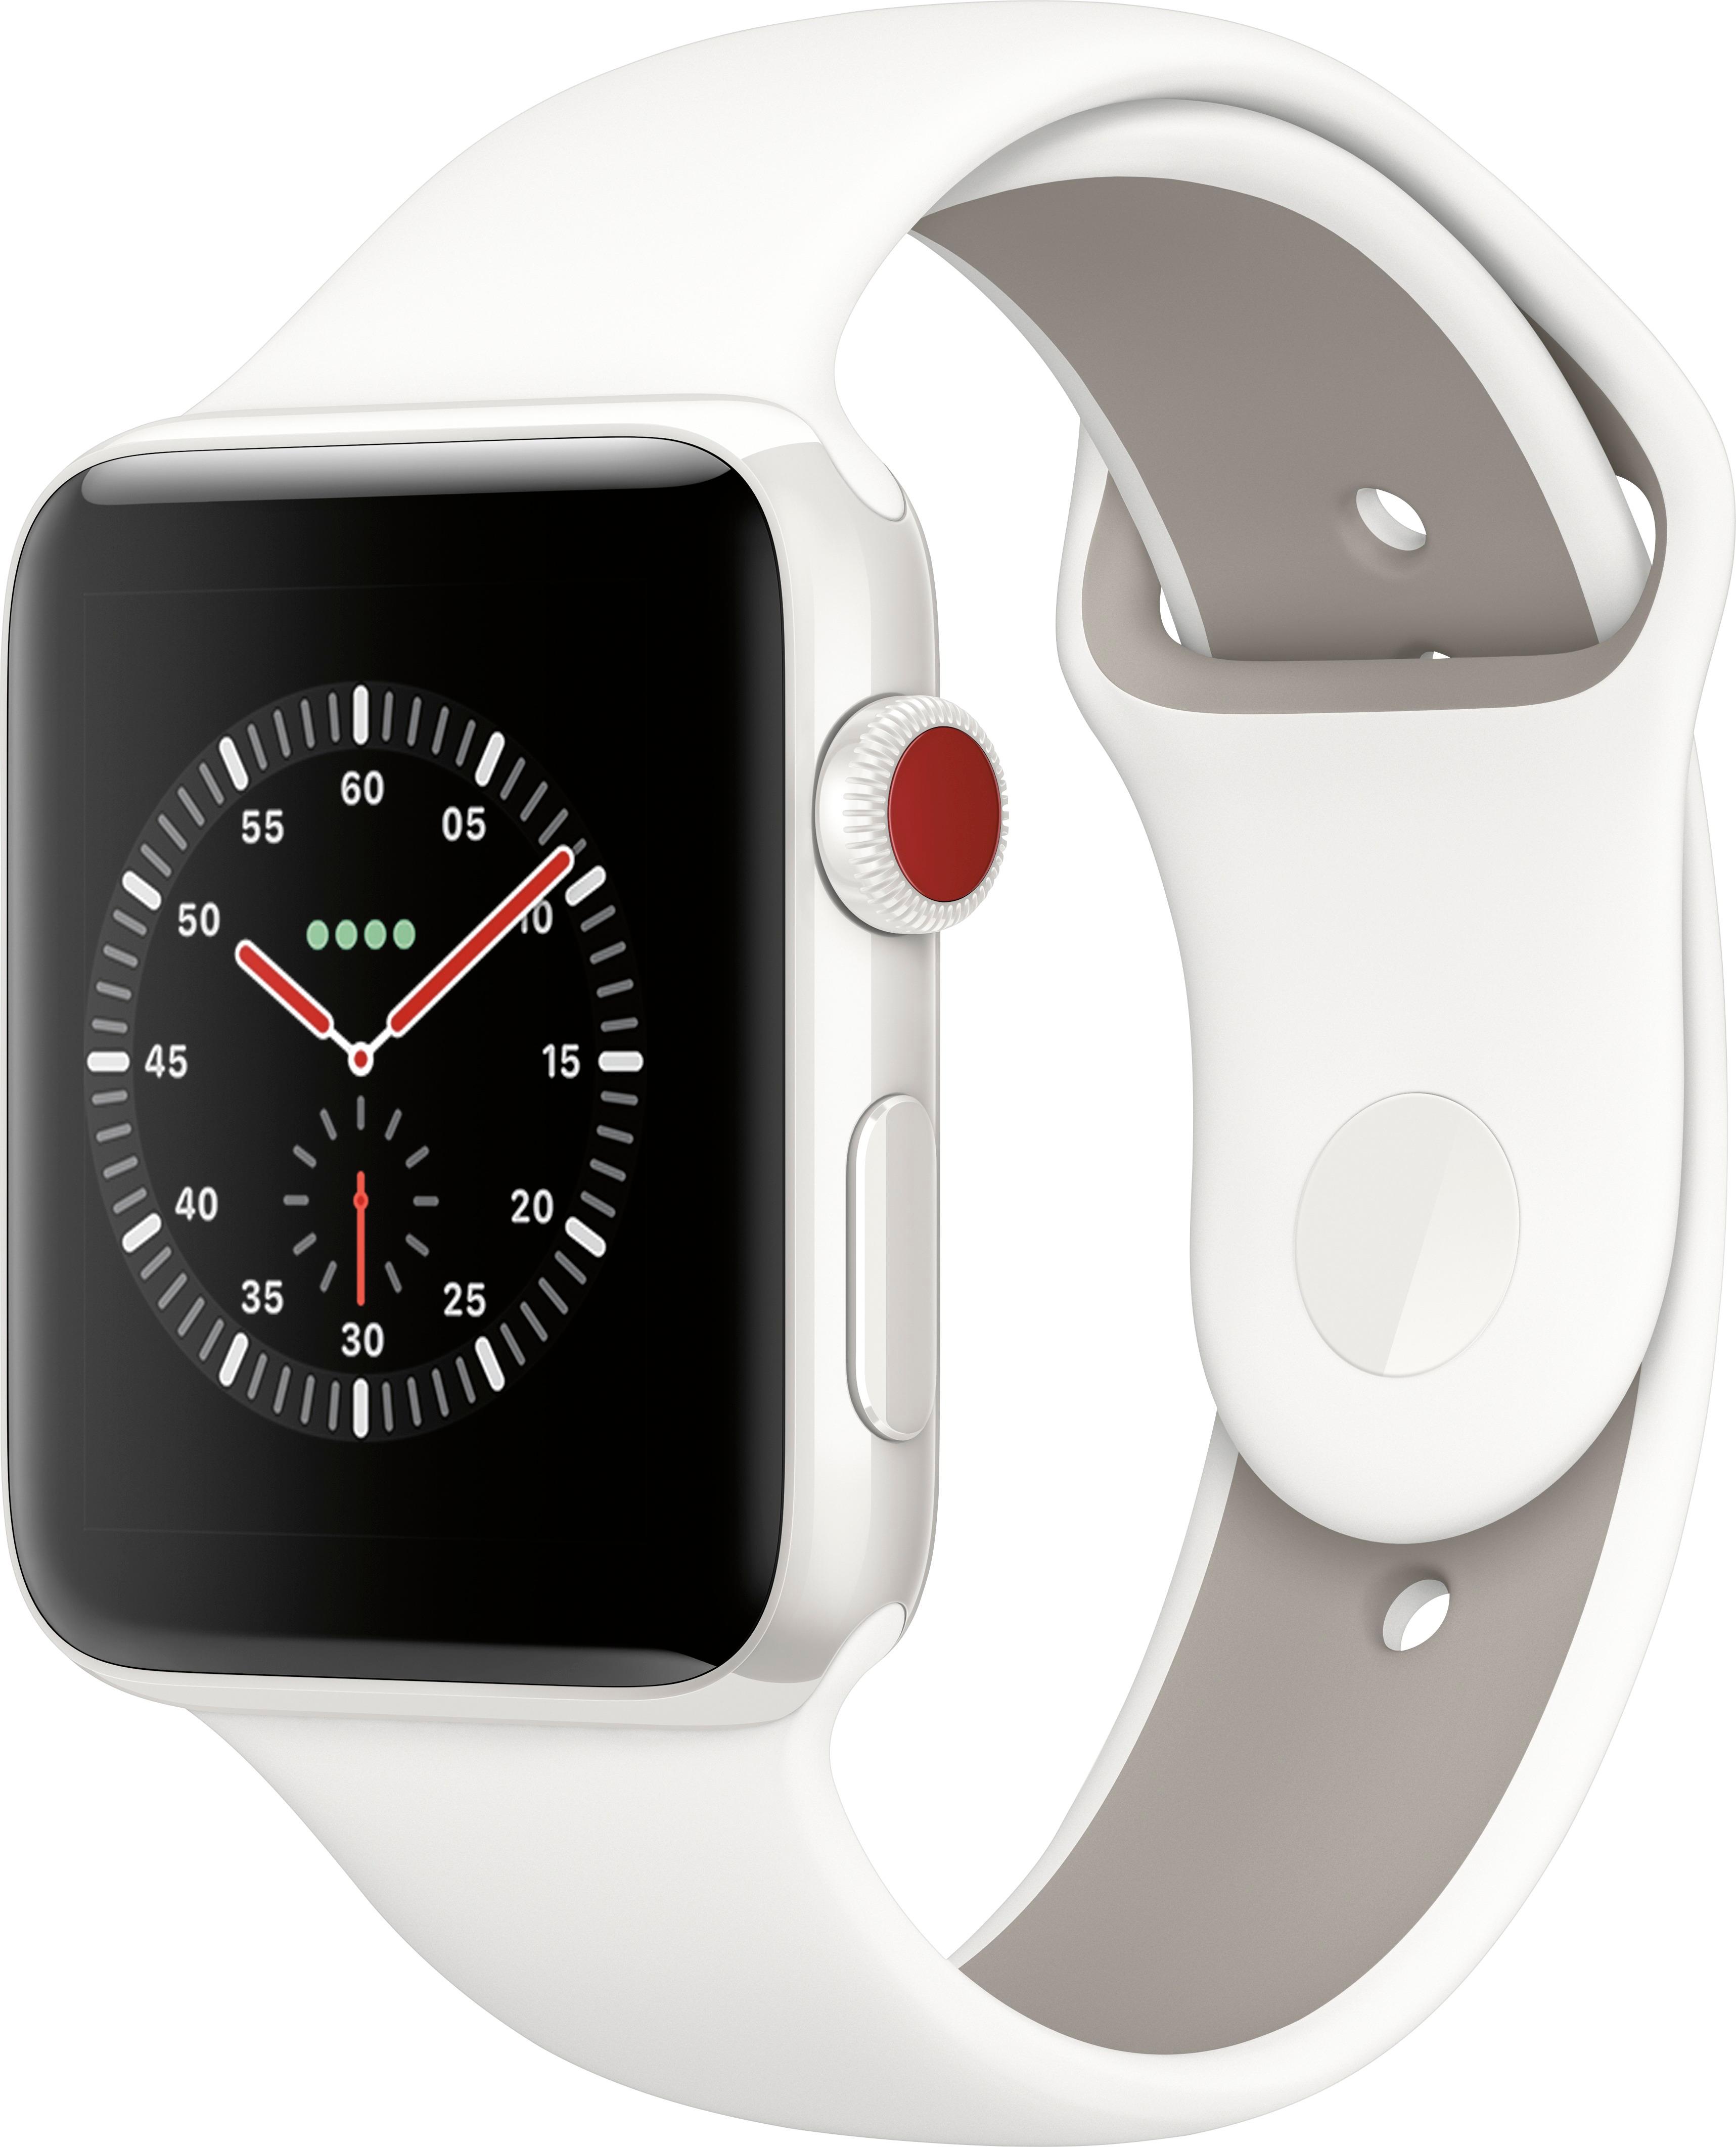 Angle View: Apple Watch Edition (GPS + Cellular) 42mm Ceramic Case with Soft White/Pebble Sport Band - White Ceramic